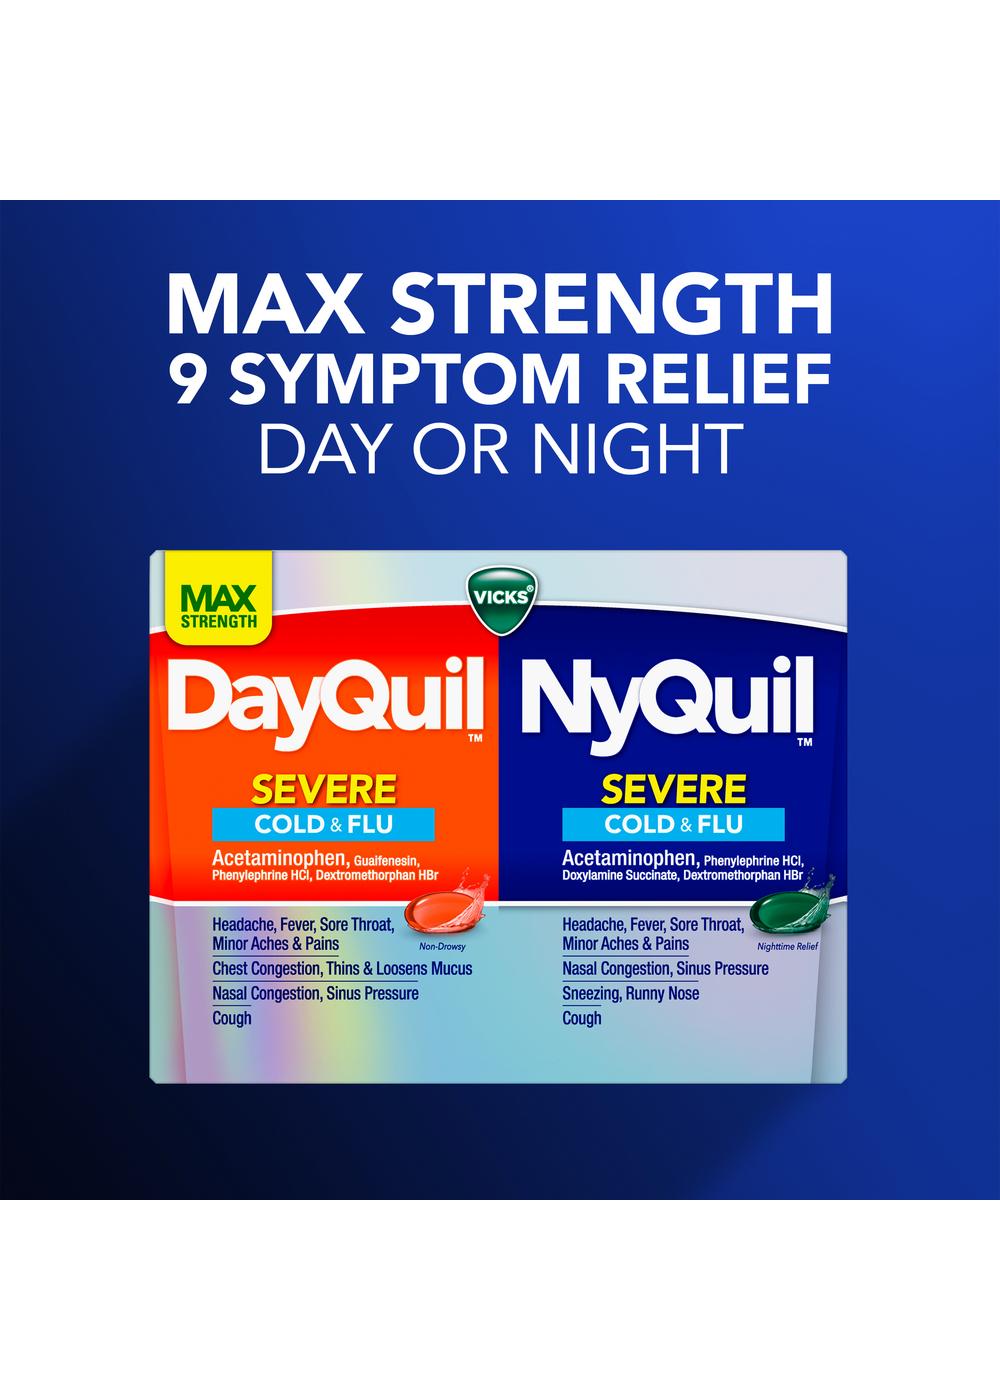 Vicks DayQuil + NyQuil SEVERE Cold & Flu Combo Pack; image 4 of 9